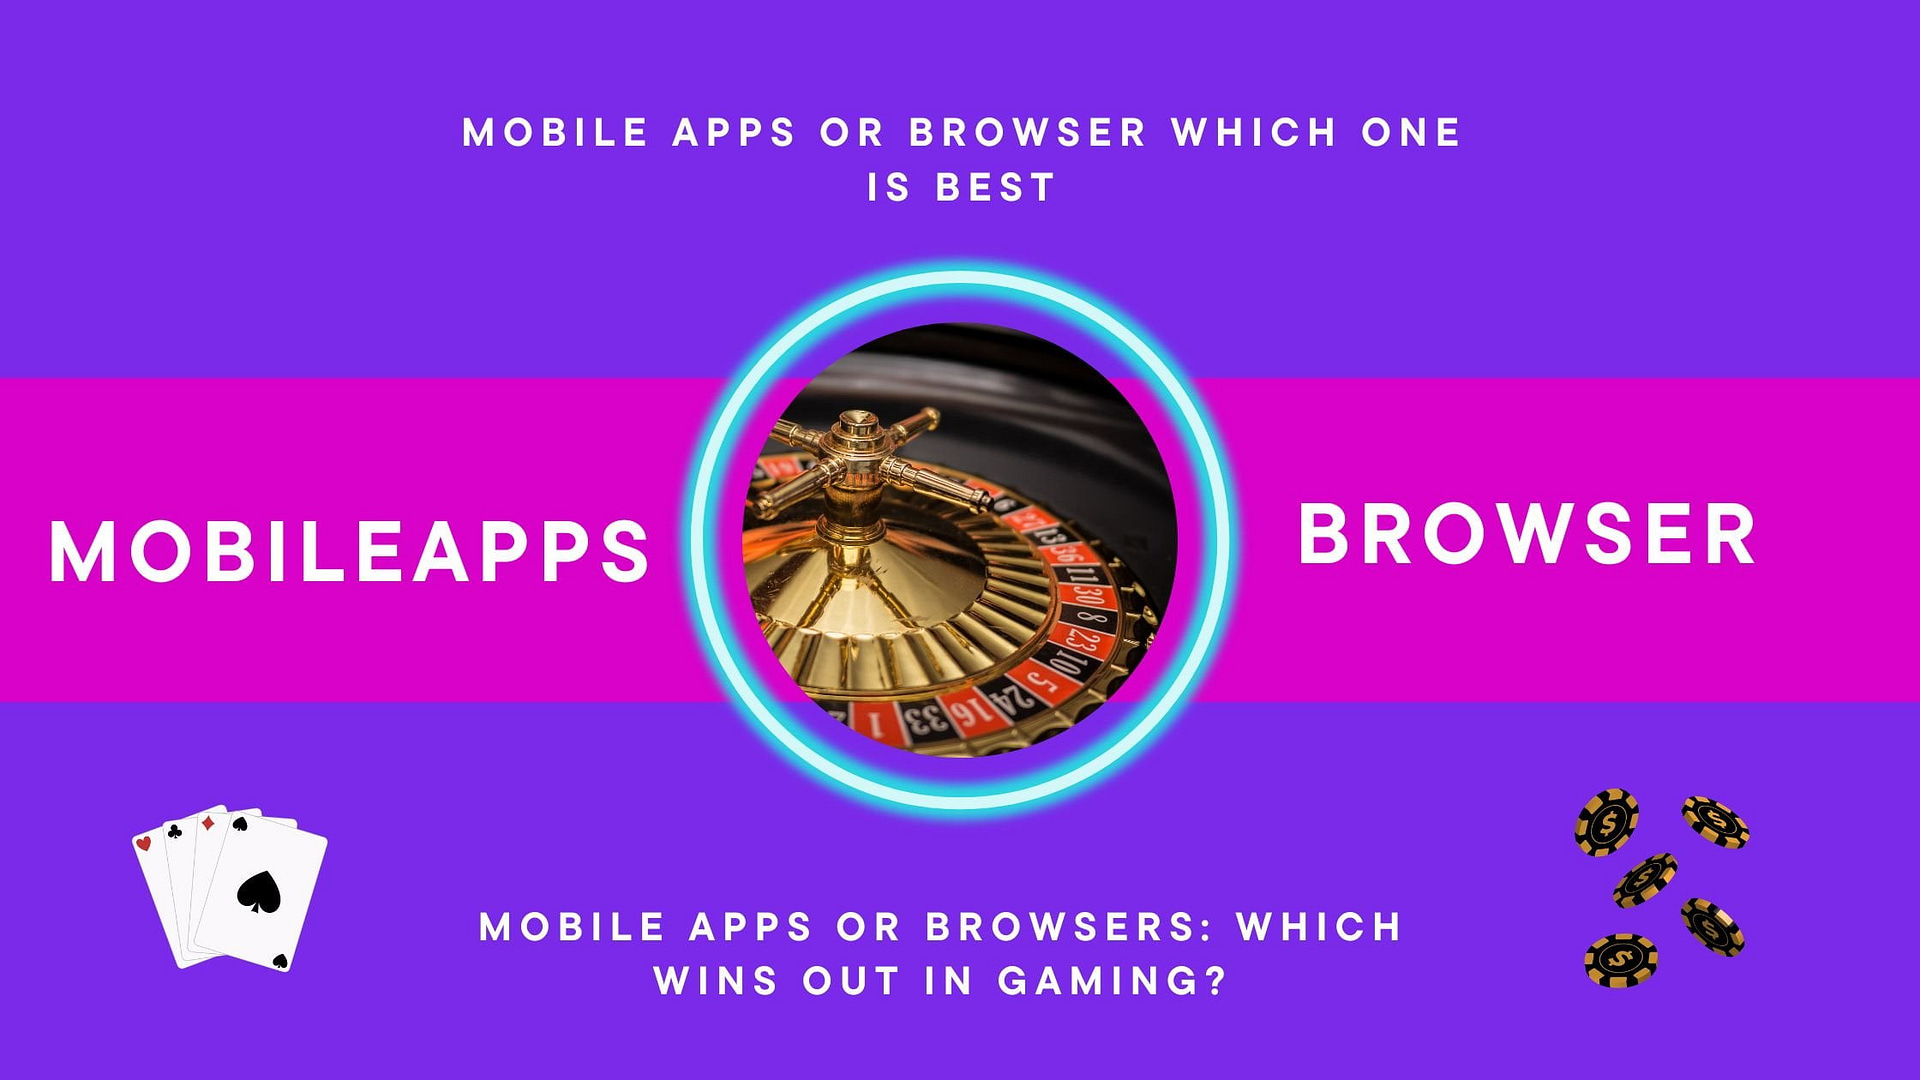 Mobile apps or browsers which wins out in gaming